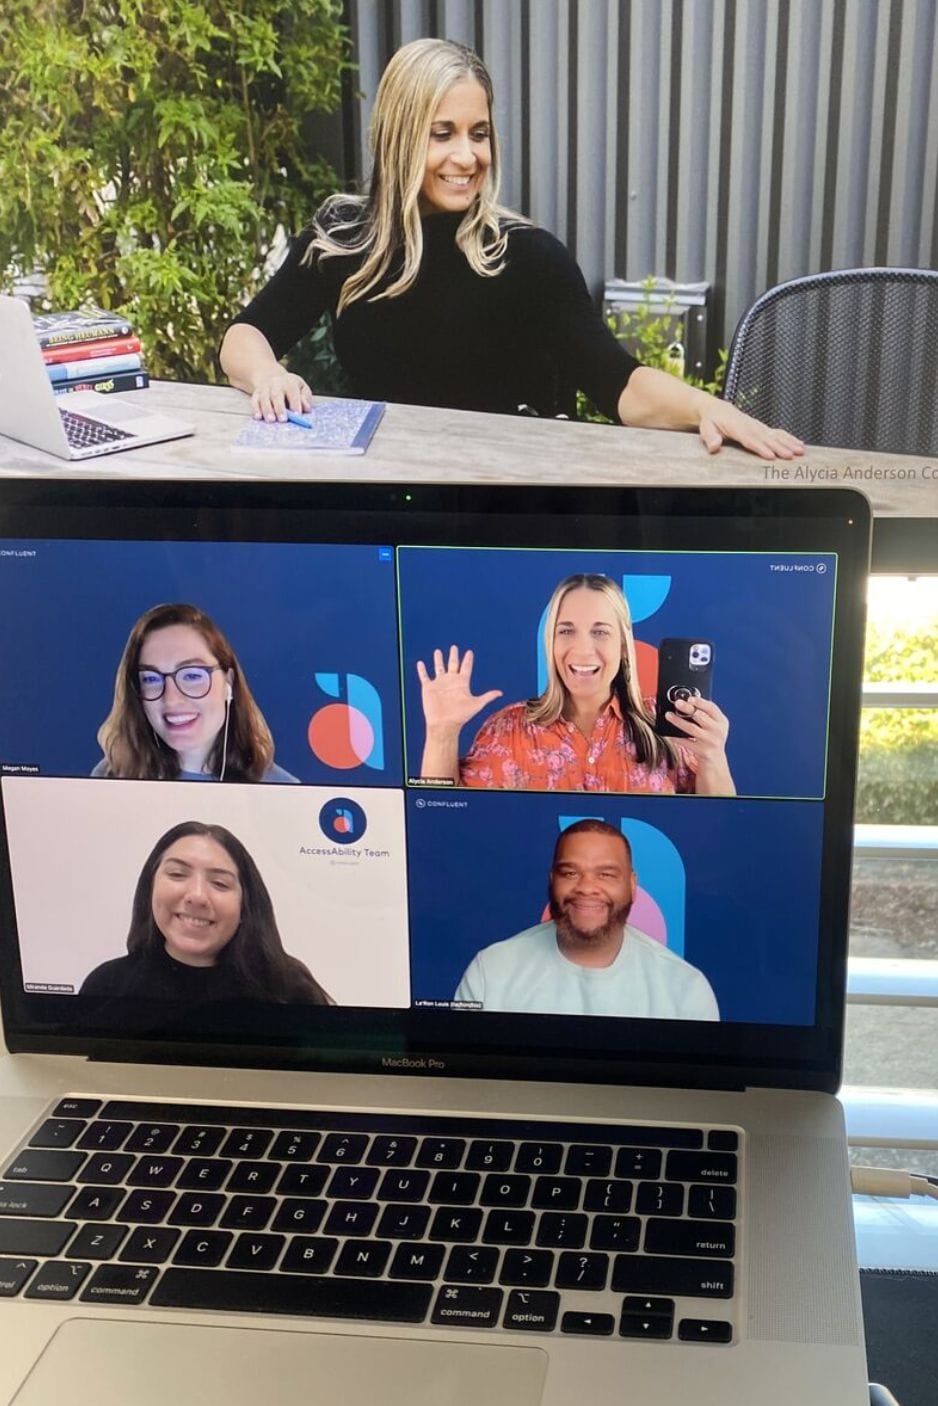 ID: Alycia waving with Confluent AccessAbility Team on a zoom presentation blue screen getting ready to give her #DisablingAbleism#Keynote to the Team. We are all smiling and excited!